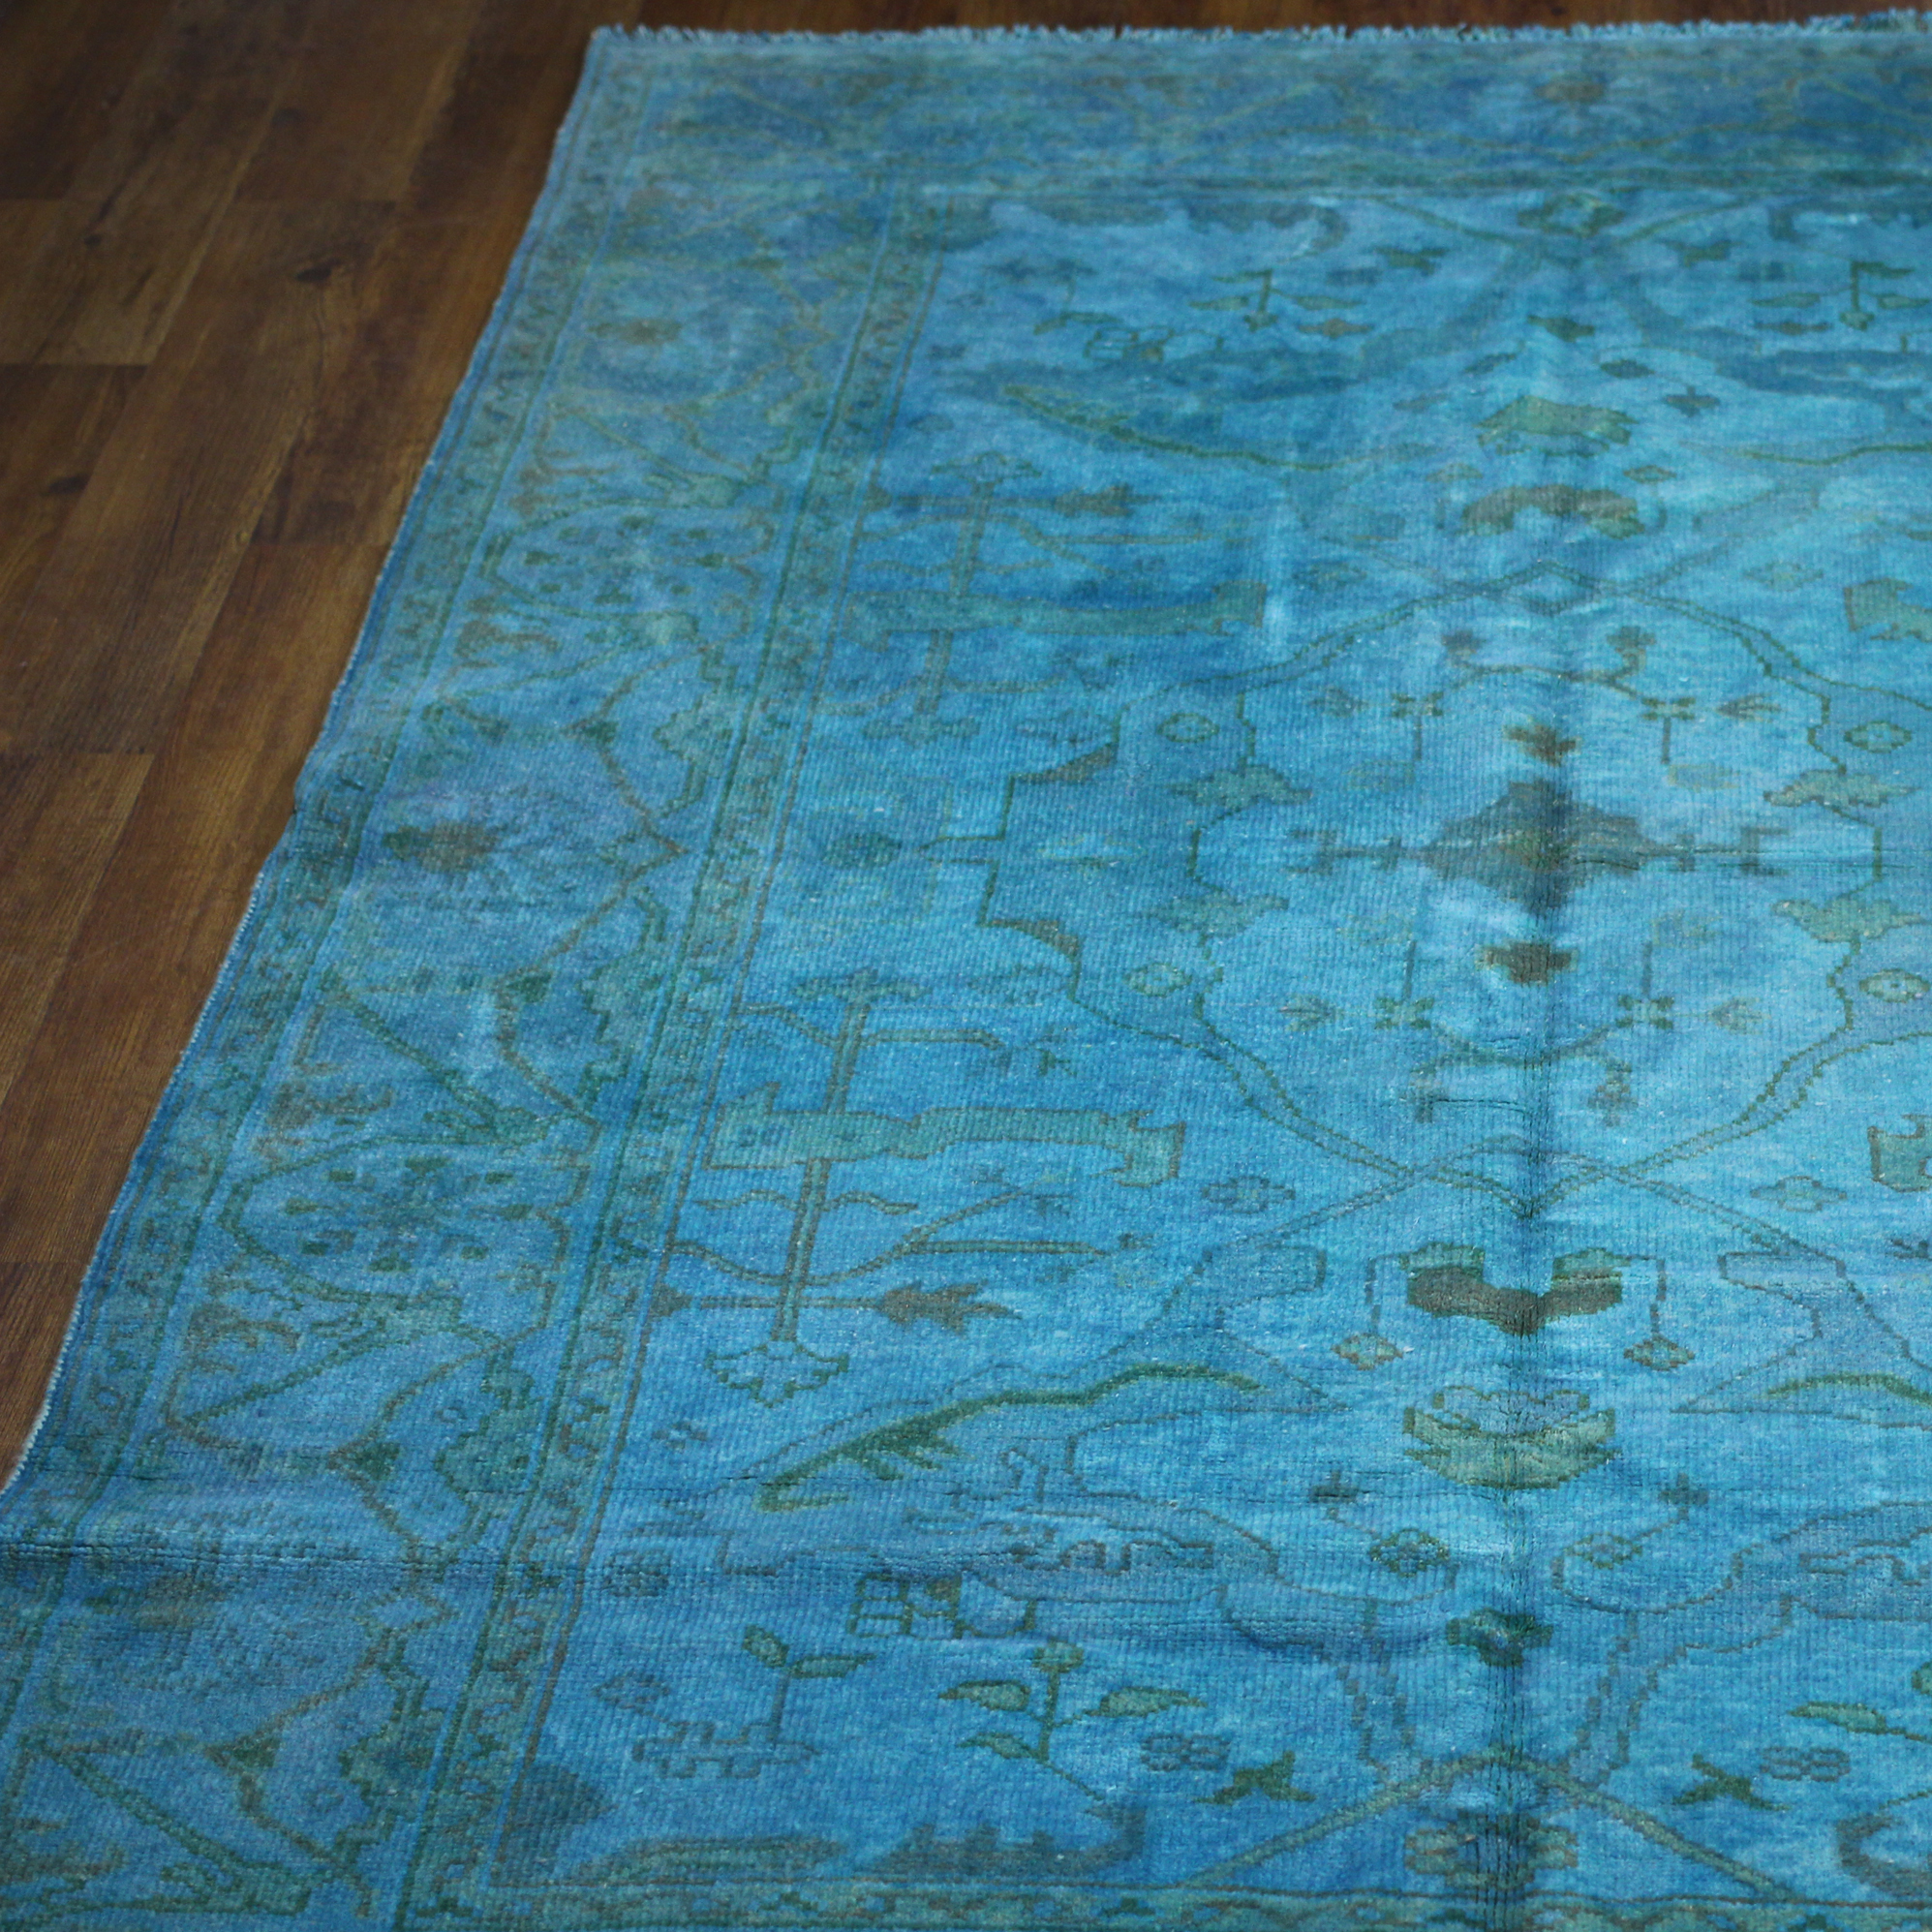 6x9 Exclusive Opensky! Organic Dyes - Teal Overdyed Rug - One Of A Kind - 2696